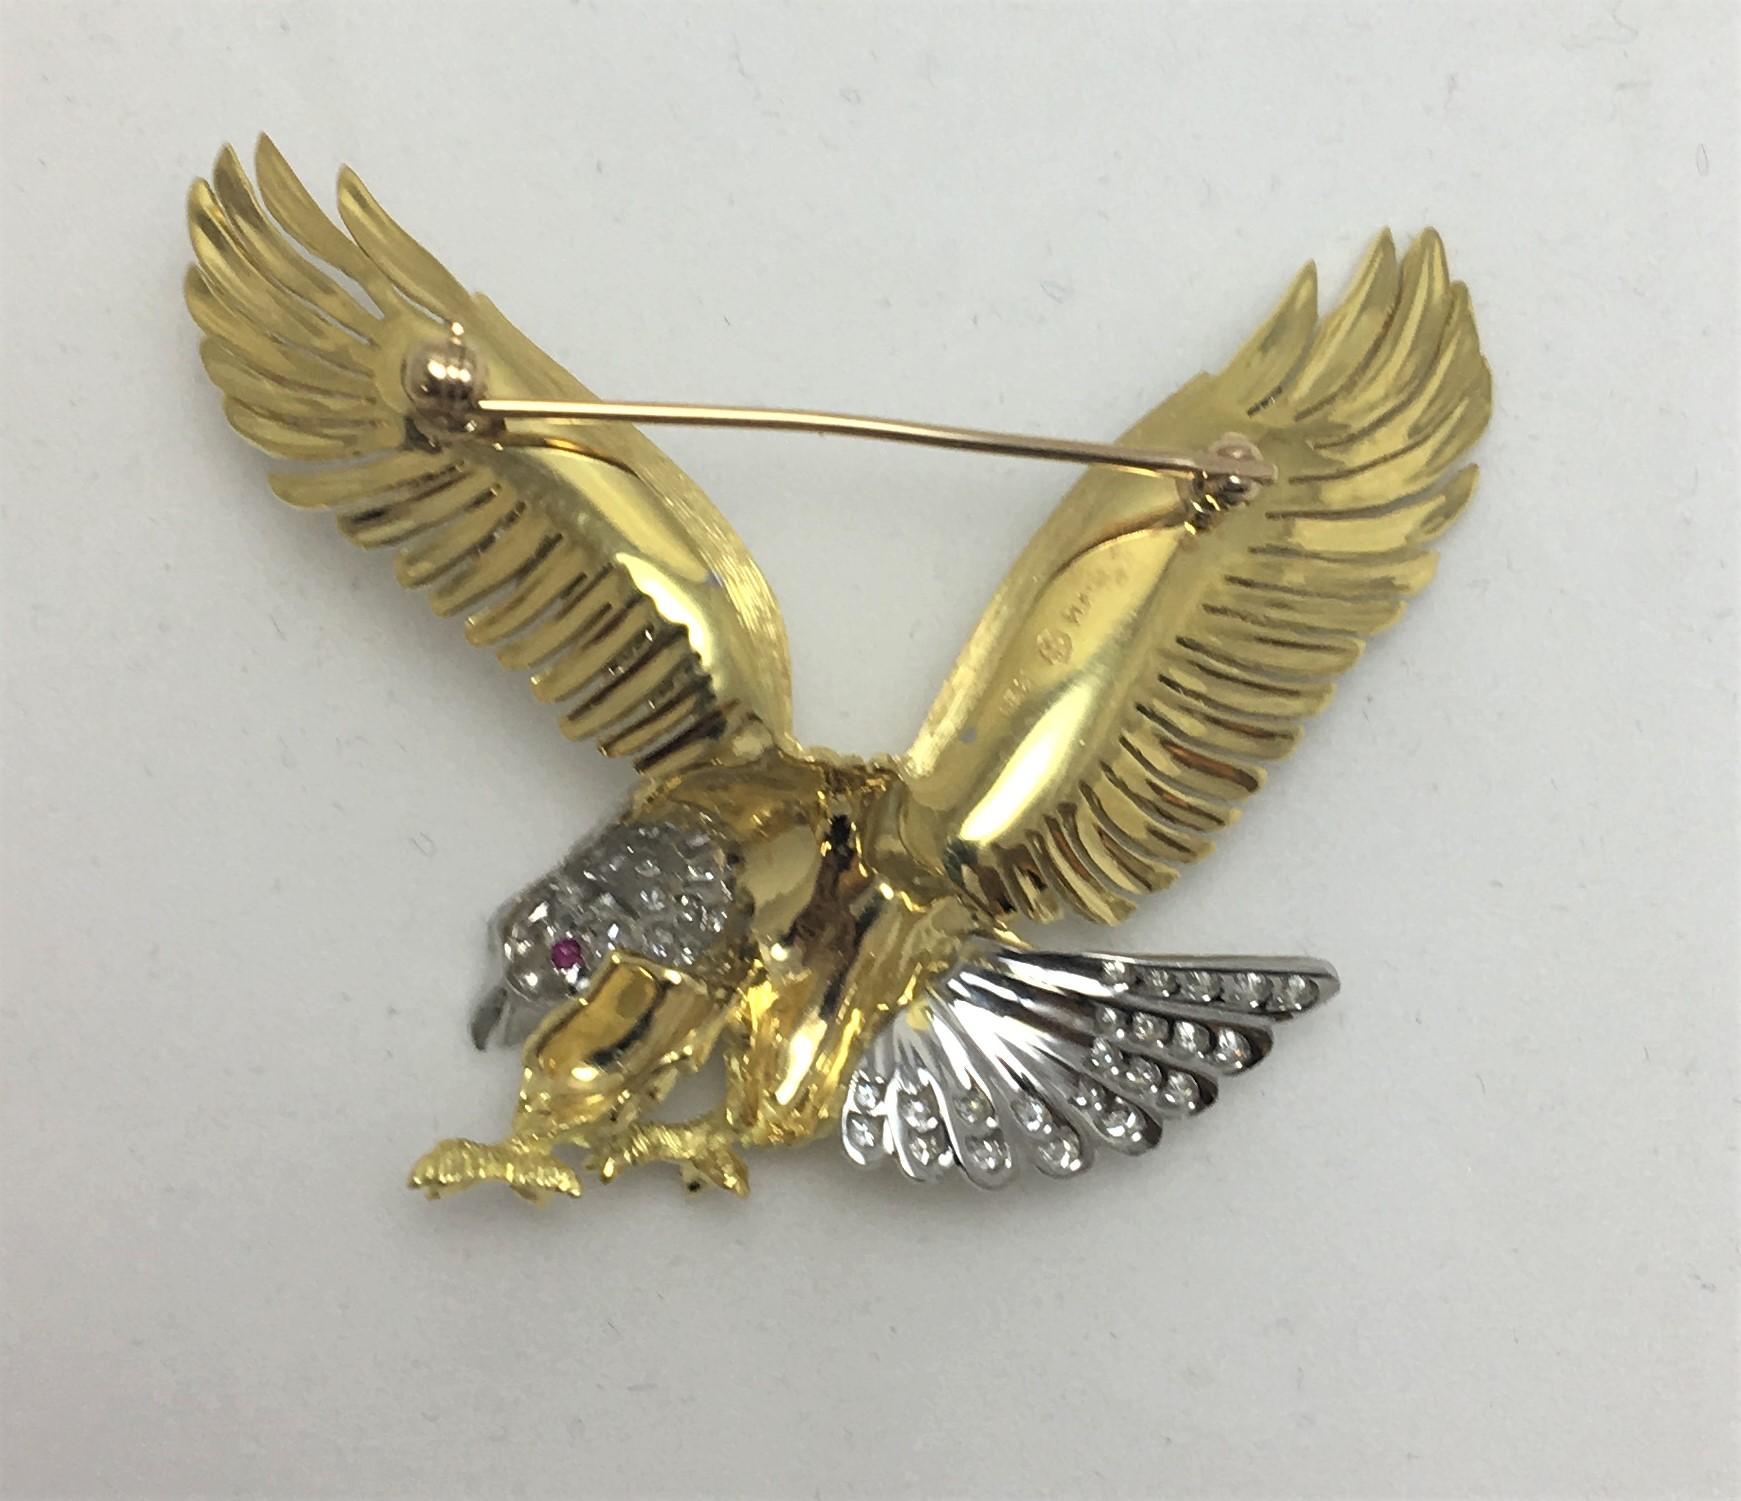 Beautiful Handcrafted McTieque 18K Yellow Gold and Platinum Eagle Brooch

100 full-cut round brilliant diamonds measuring approximately 1.3-1.8mm each
Approximately 2.00 Carat Total Weight
1 Round Ruby as 